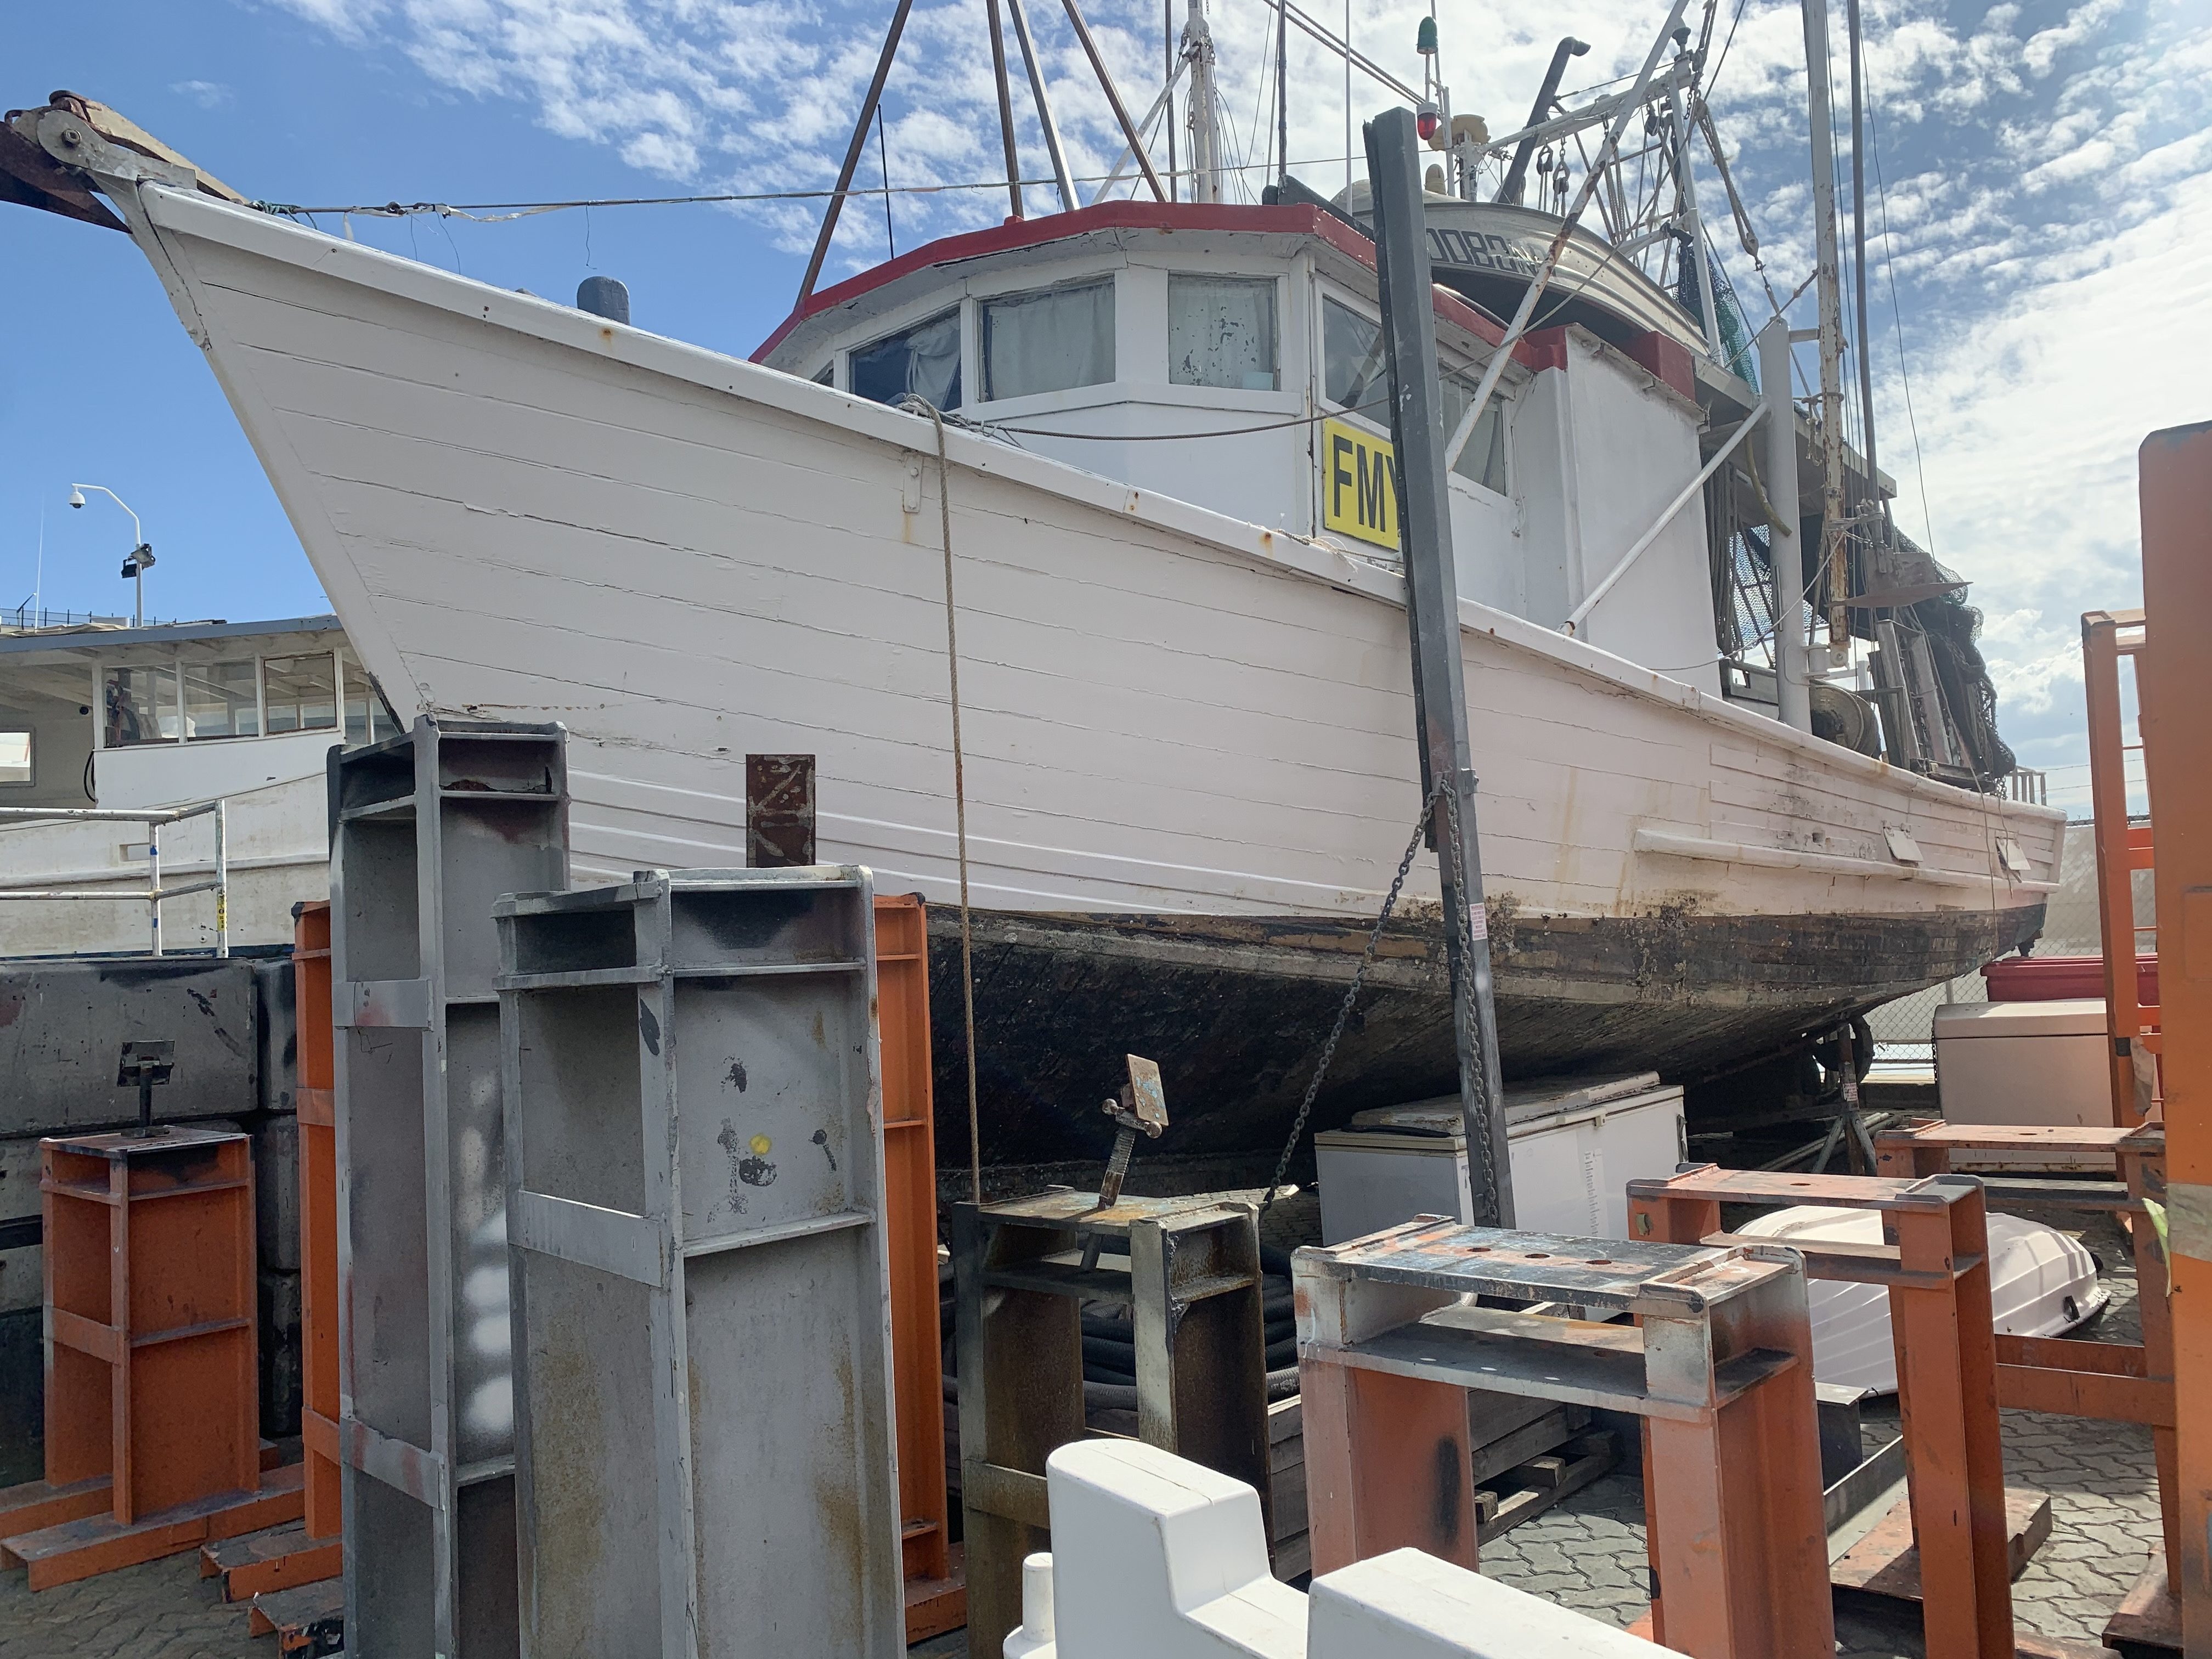 FISHING TRAWLER TIMBER - TO BE SOLD UNRESERVED.